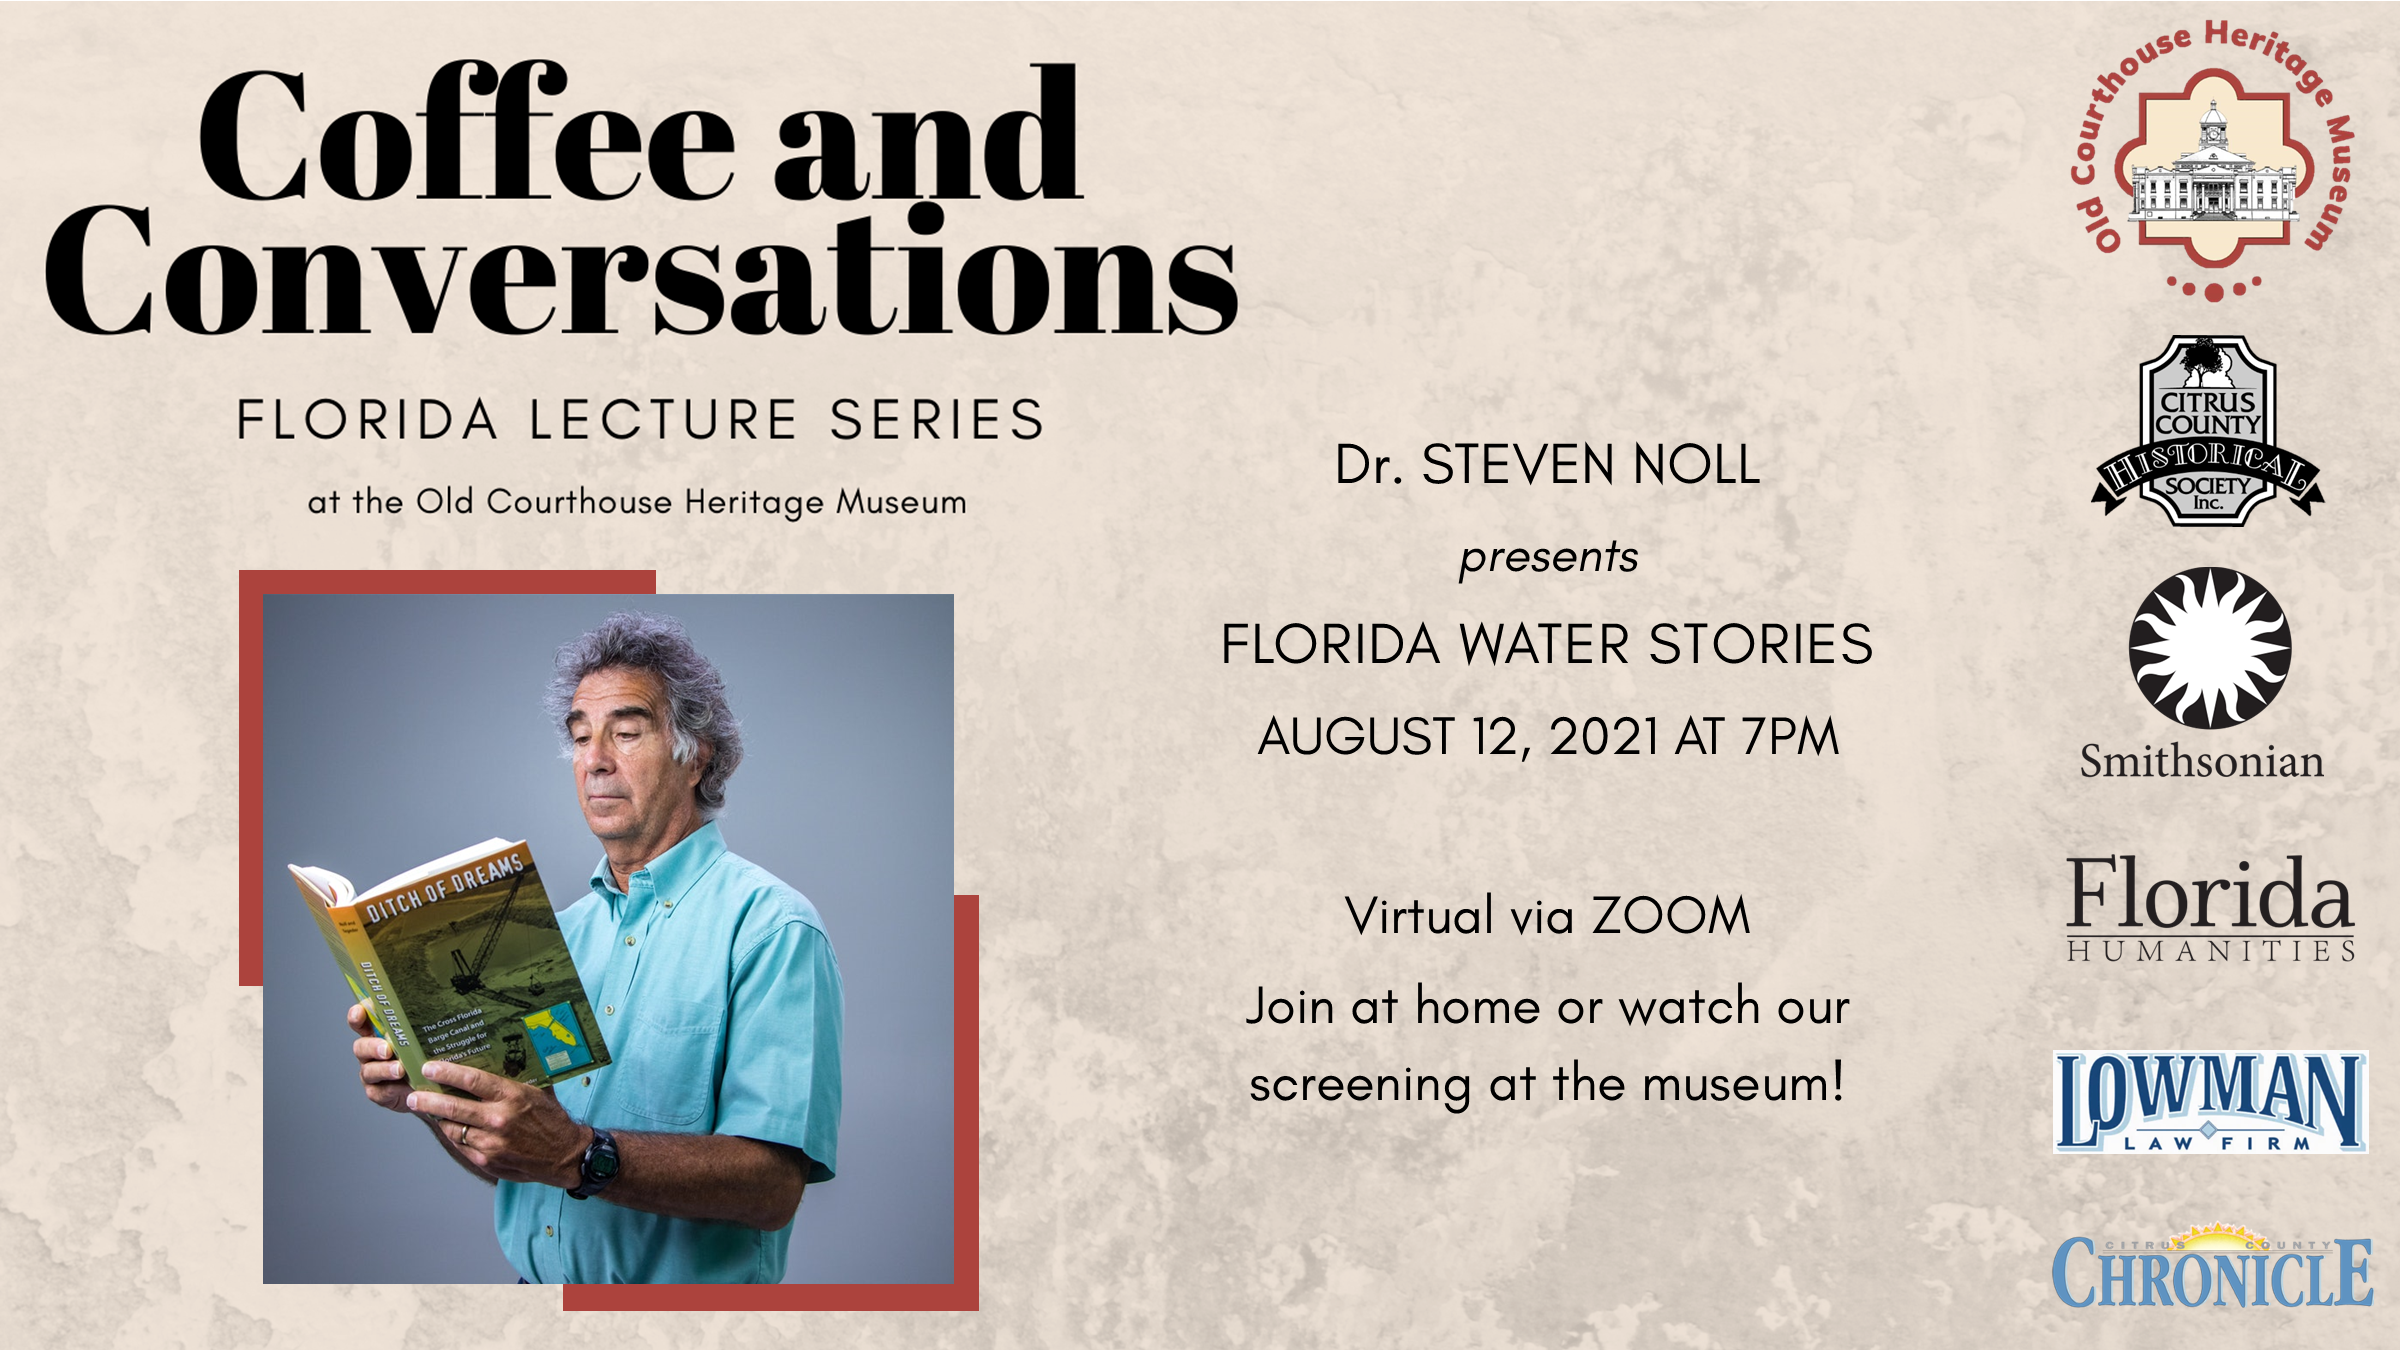 Coffee and Conversations: Florida Lecture Series at the Old Courthouse Heritage Museum. Below the text is an image of a man in a blue shirt, with curly gray hair, reading a book titled Ditch of Dreams. The image advertising Dr. Steven Noll presents Florida Water Stories August 12, 2021 at 7PM. Virtual via Zoom. Join us from home or for a special live screening at the museum. Sponsor logos on the right include: Citrus County Historical Society, Smithsonian, Florida Humanities, Lowman Law Firm, and the Citrus County Chronicle.